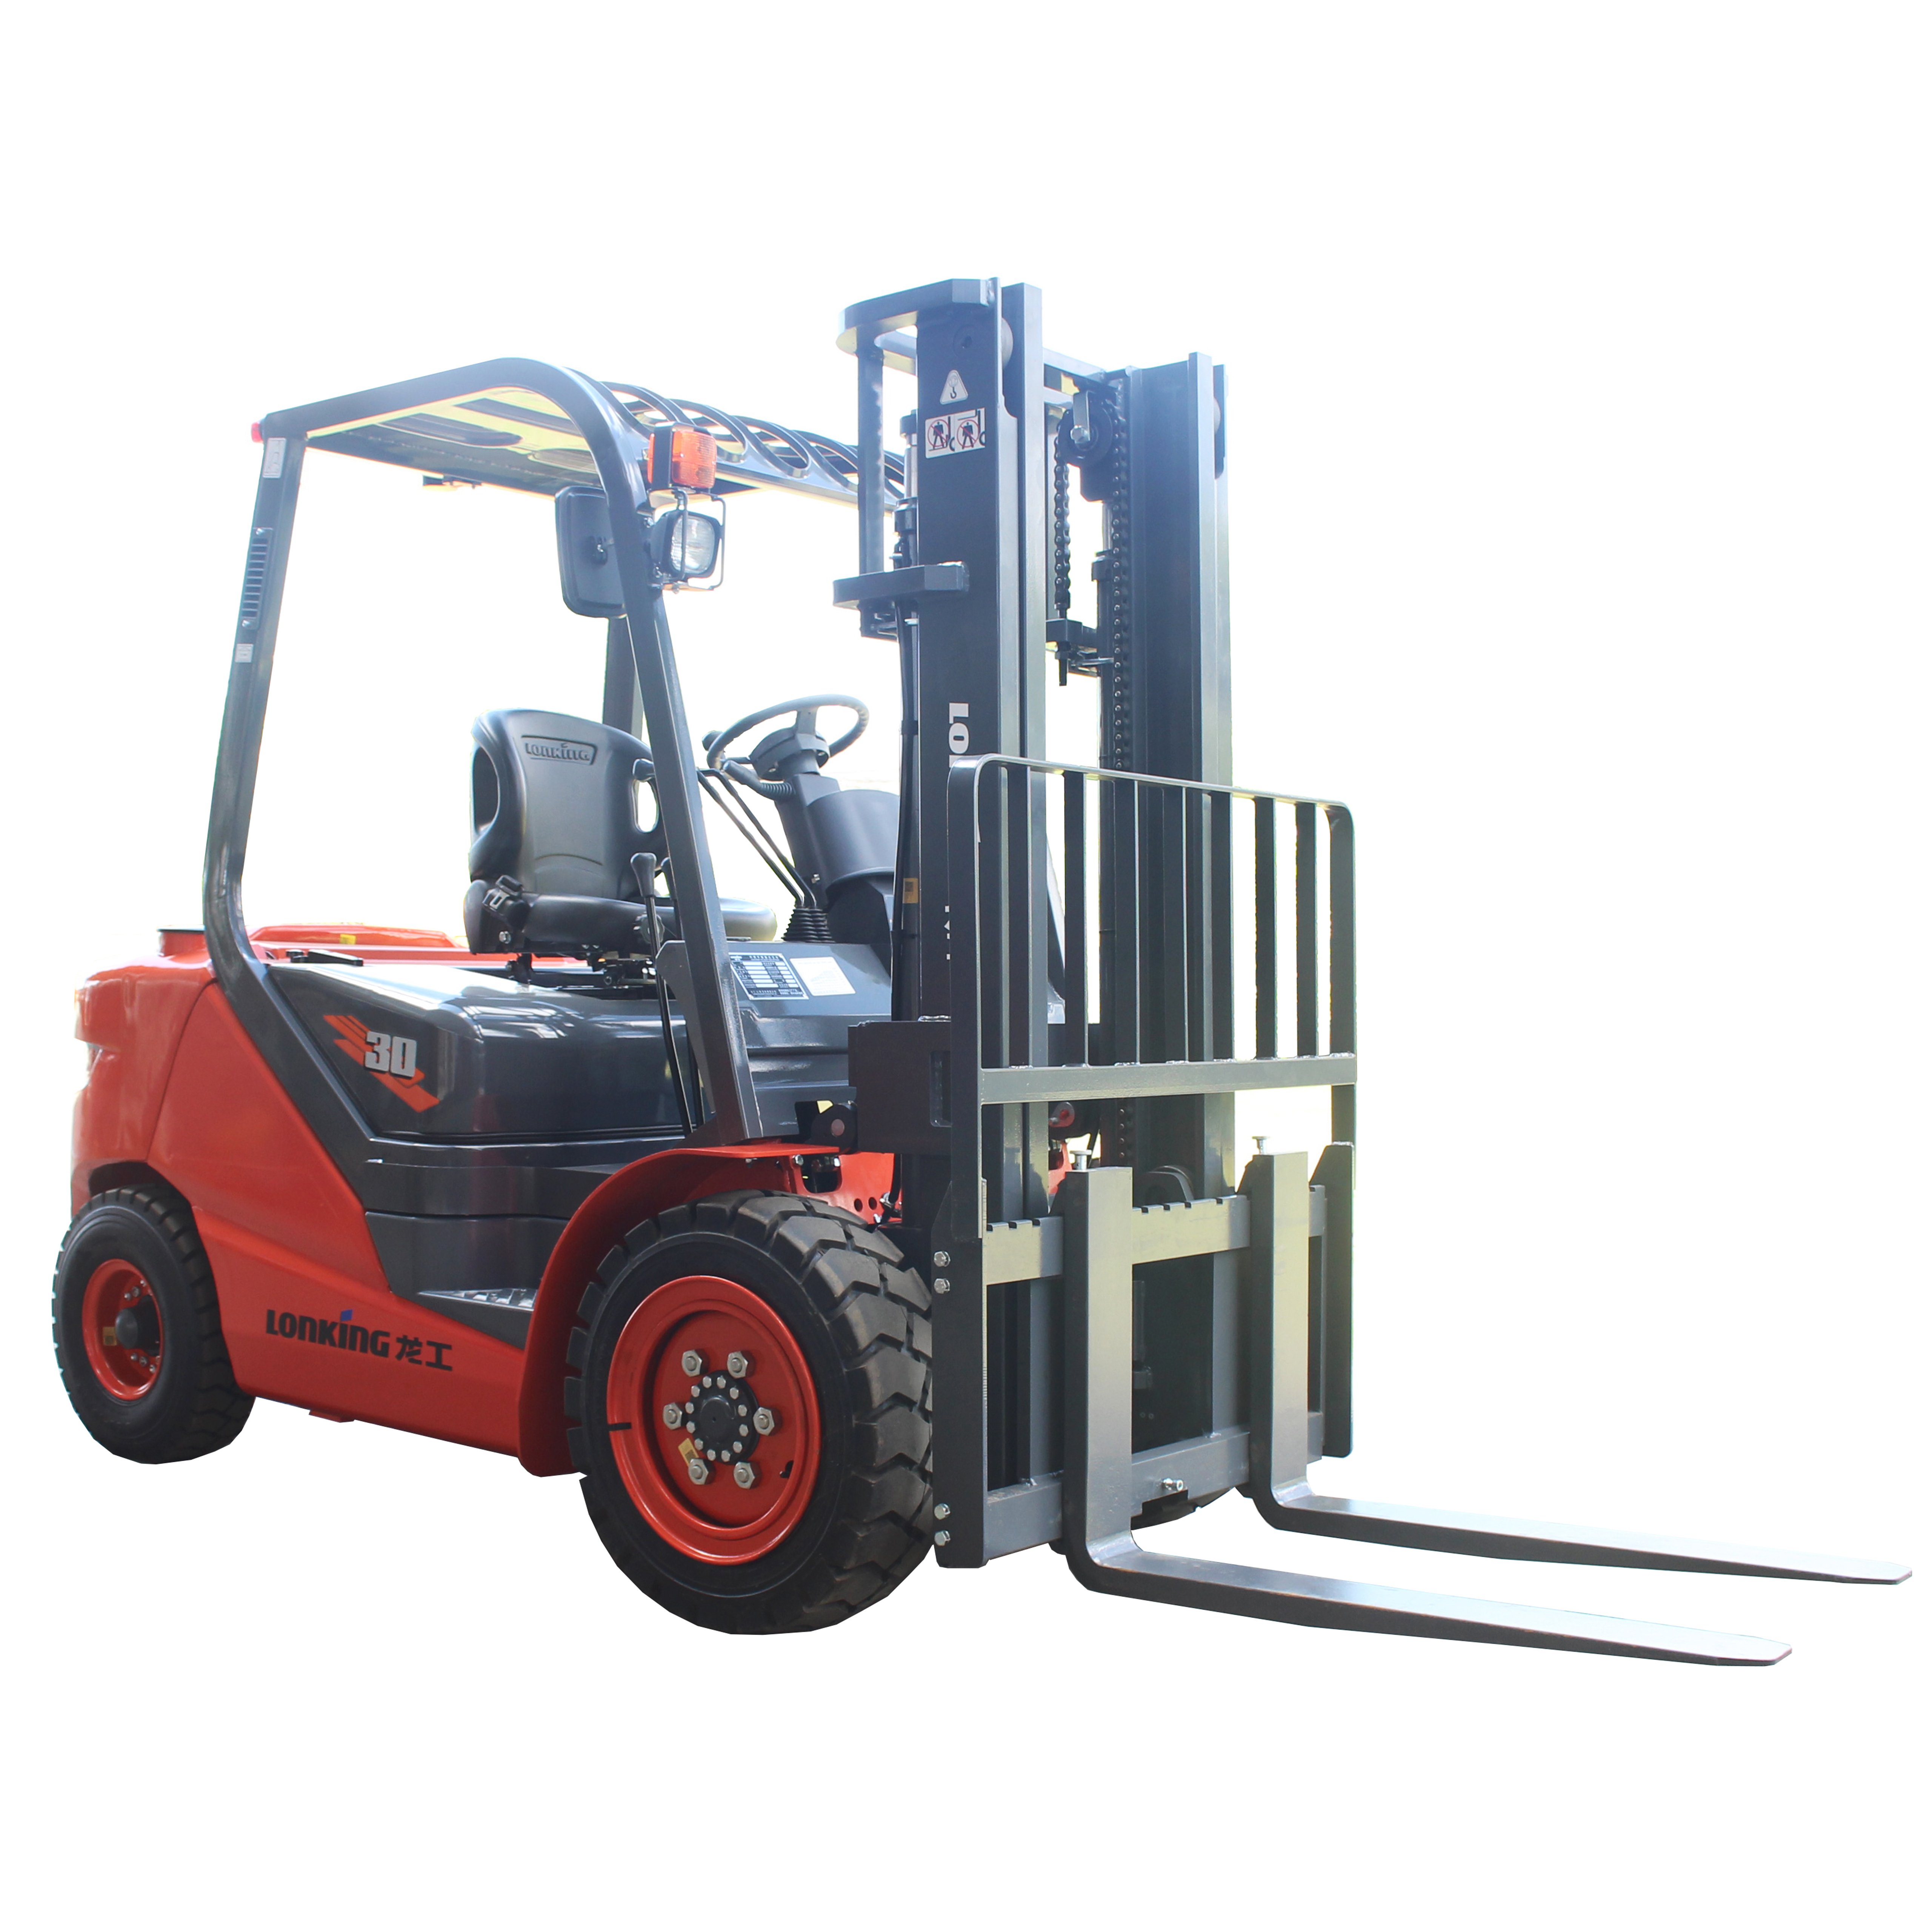 LONKING LG30 3 ton portable china narrow aisle all terrain diesel forklift Fuel forklift